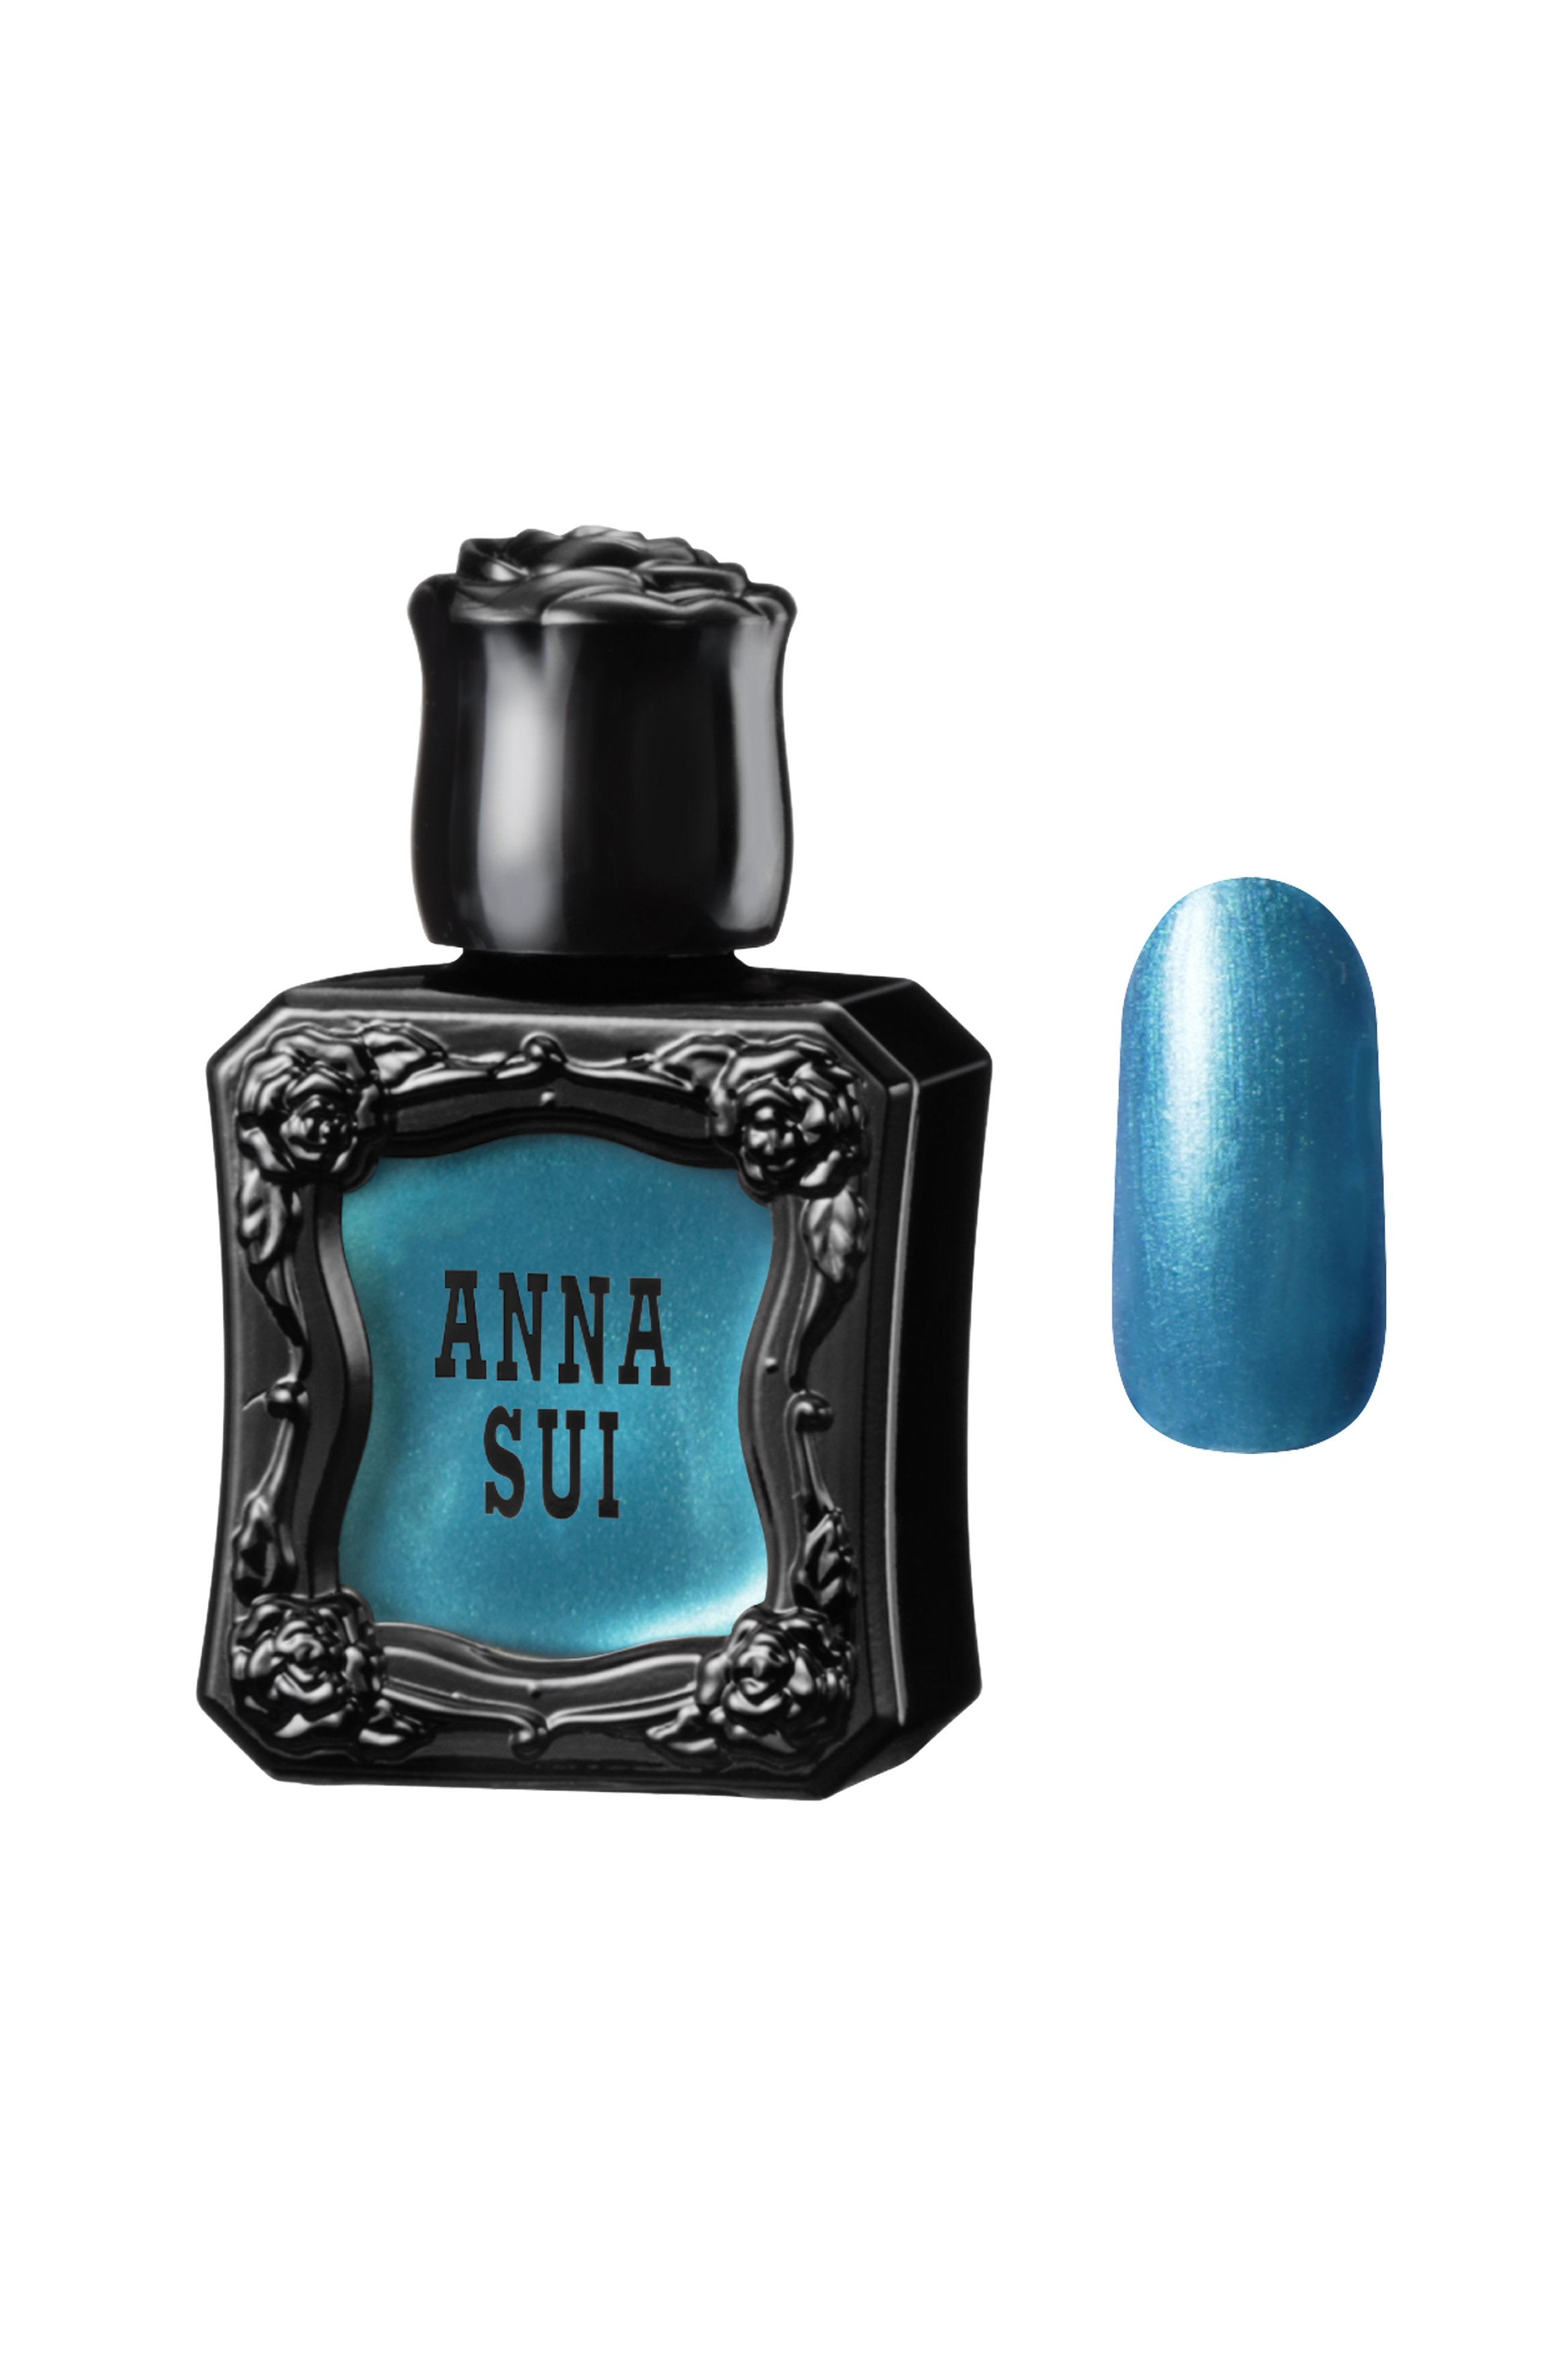 DEEP BLUE Nail Polish bottles, with raised rose pattern, Anna Sui in black over nail colors in bottle front